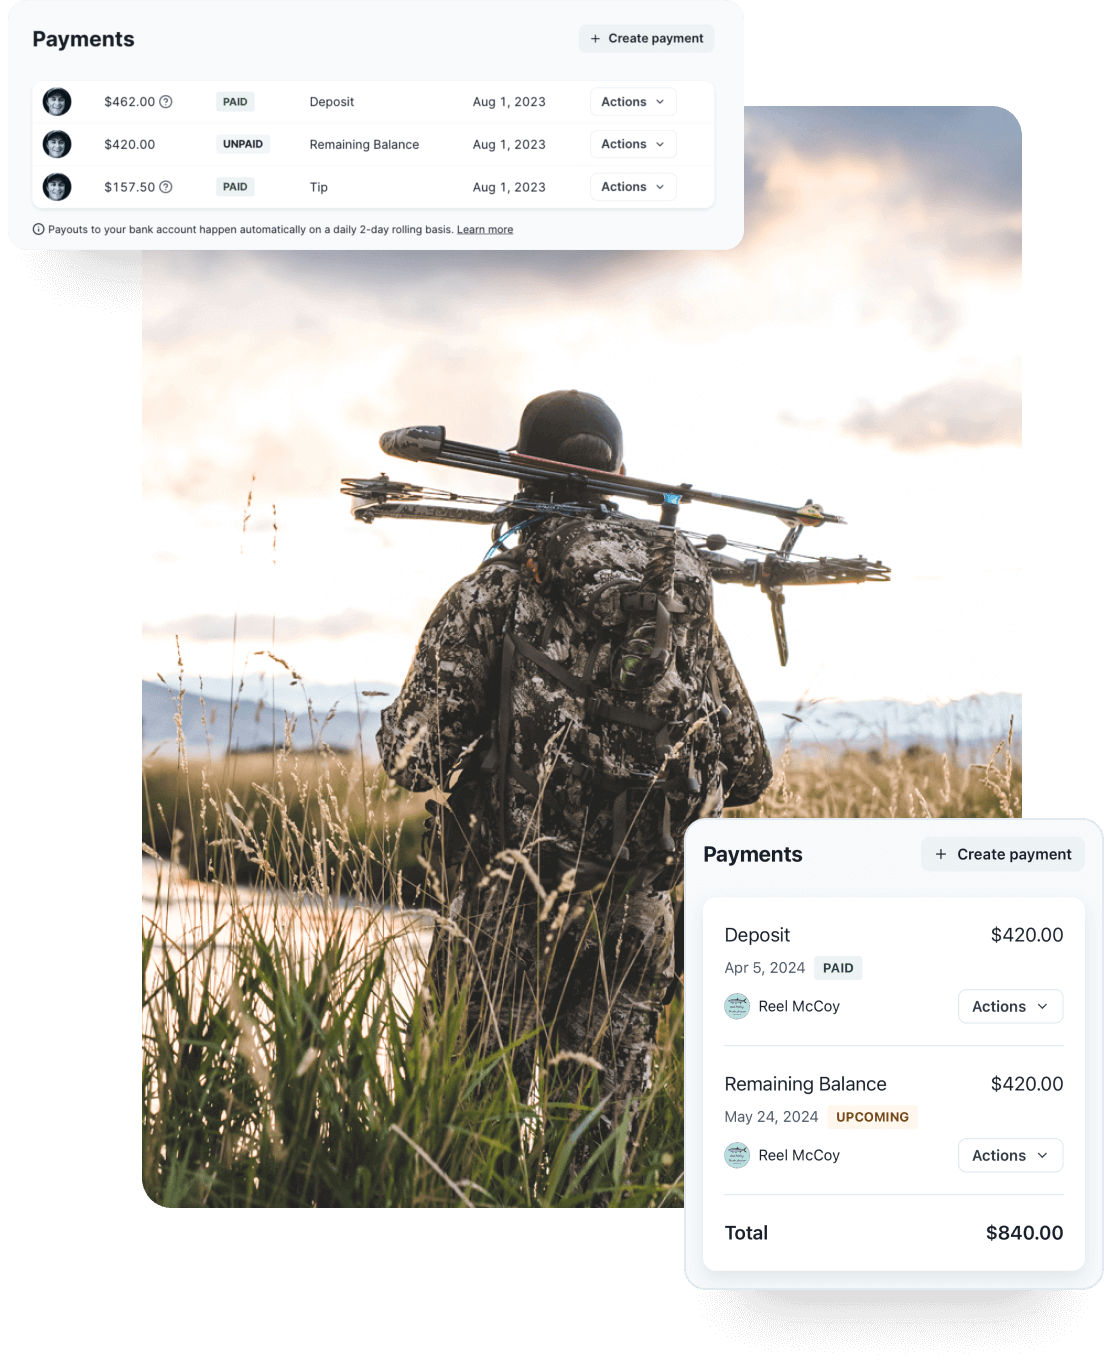 A collage featuring a hunter in a marsh with a bow and arrows on his back, a list of payments, and the Deposit and Remaining Balance payment widget